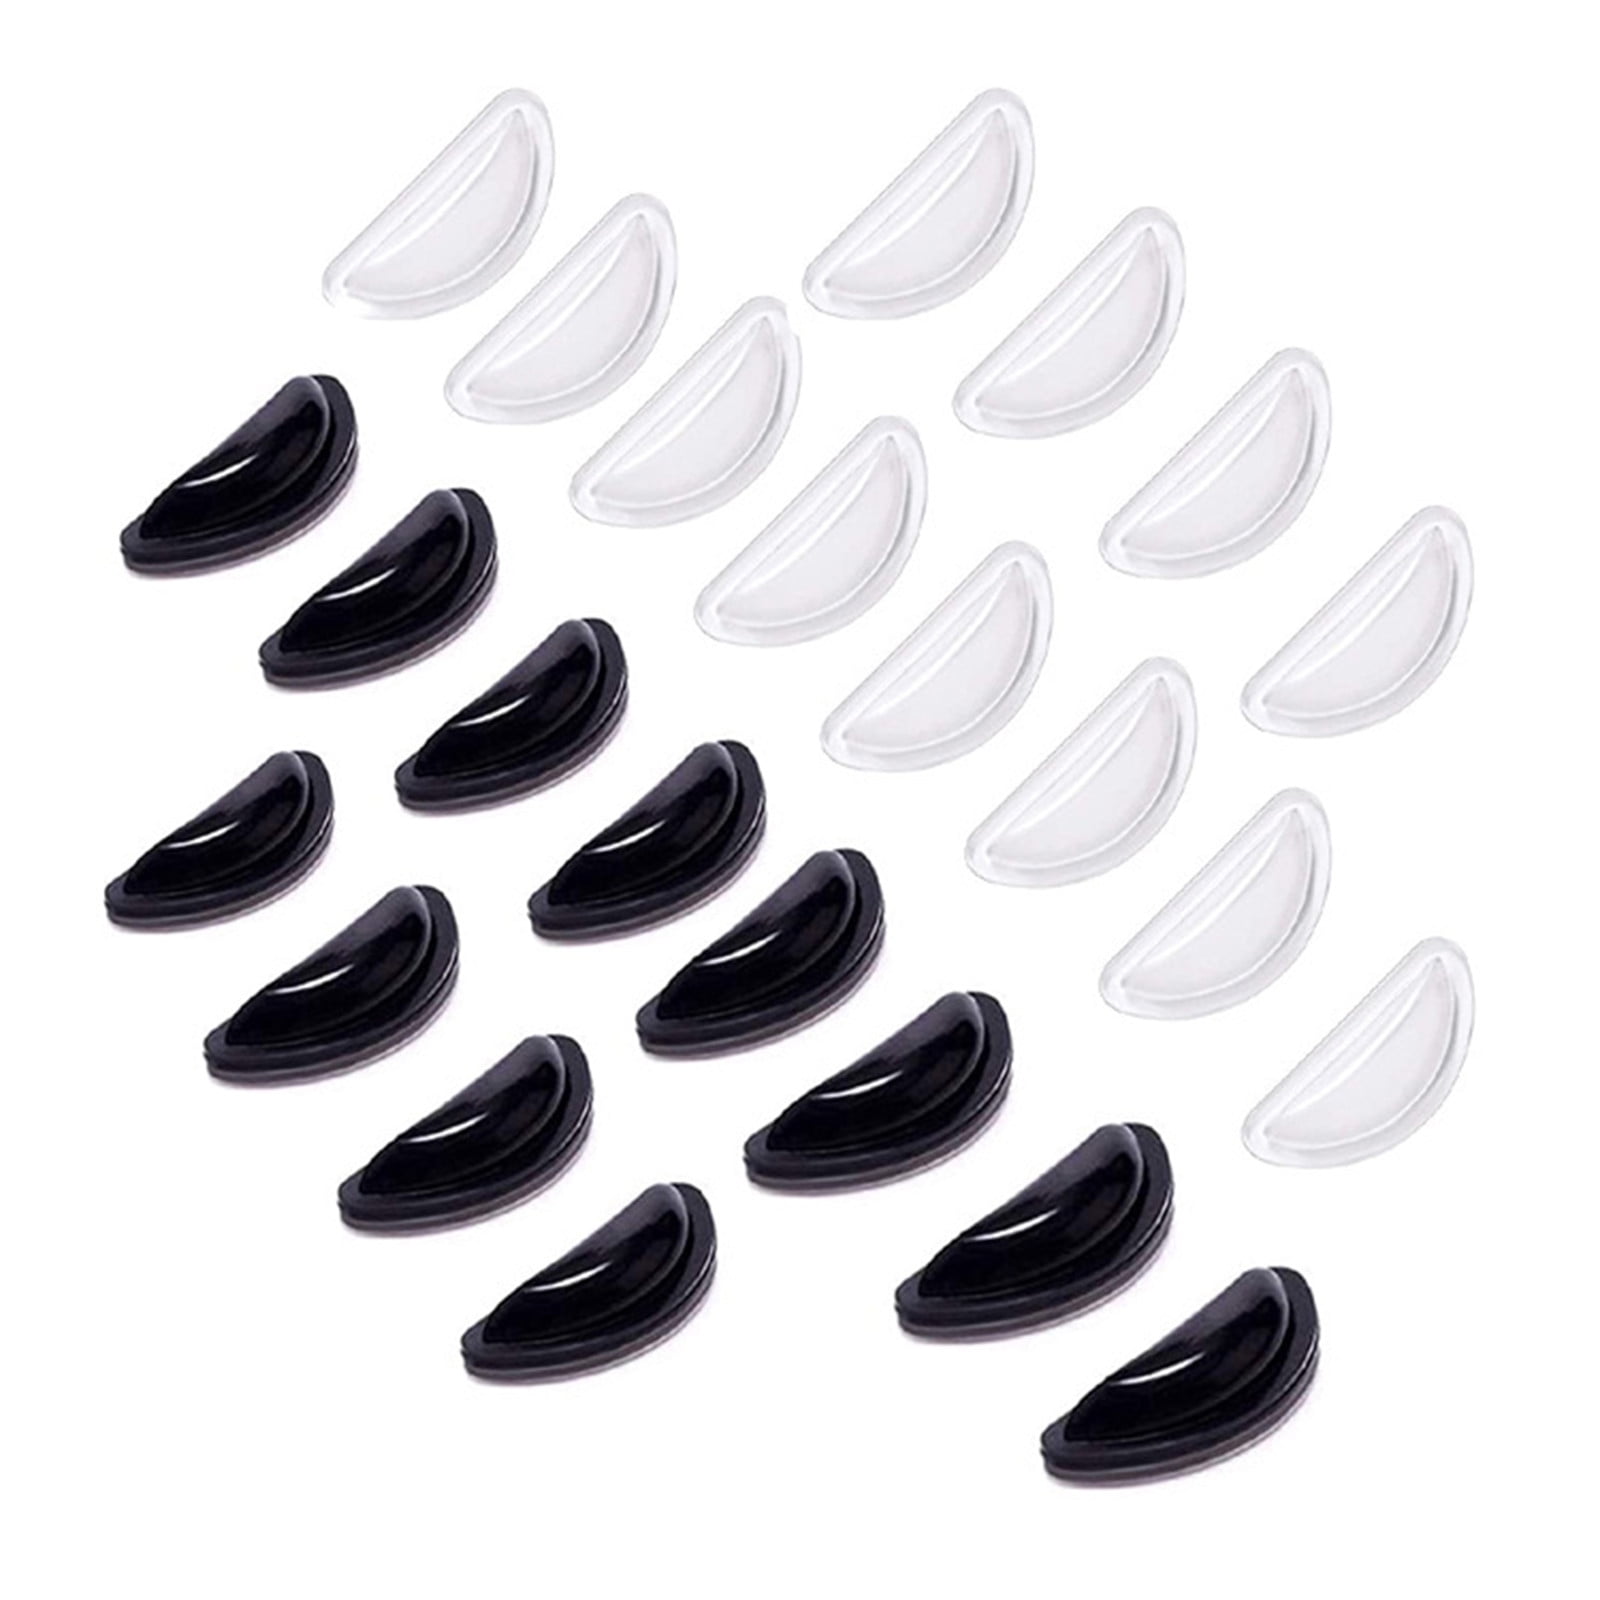 Buy 12 Pairs Eyeglass Nose Pads For Glasses Sunglasses Thin Nose Pads Online At Lowest Price In